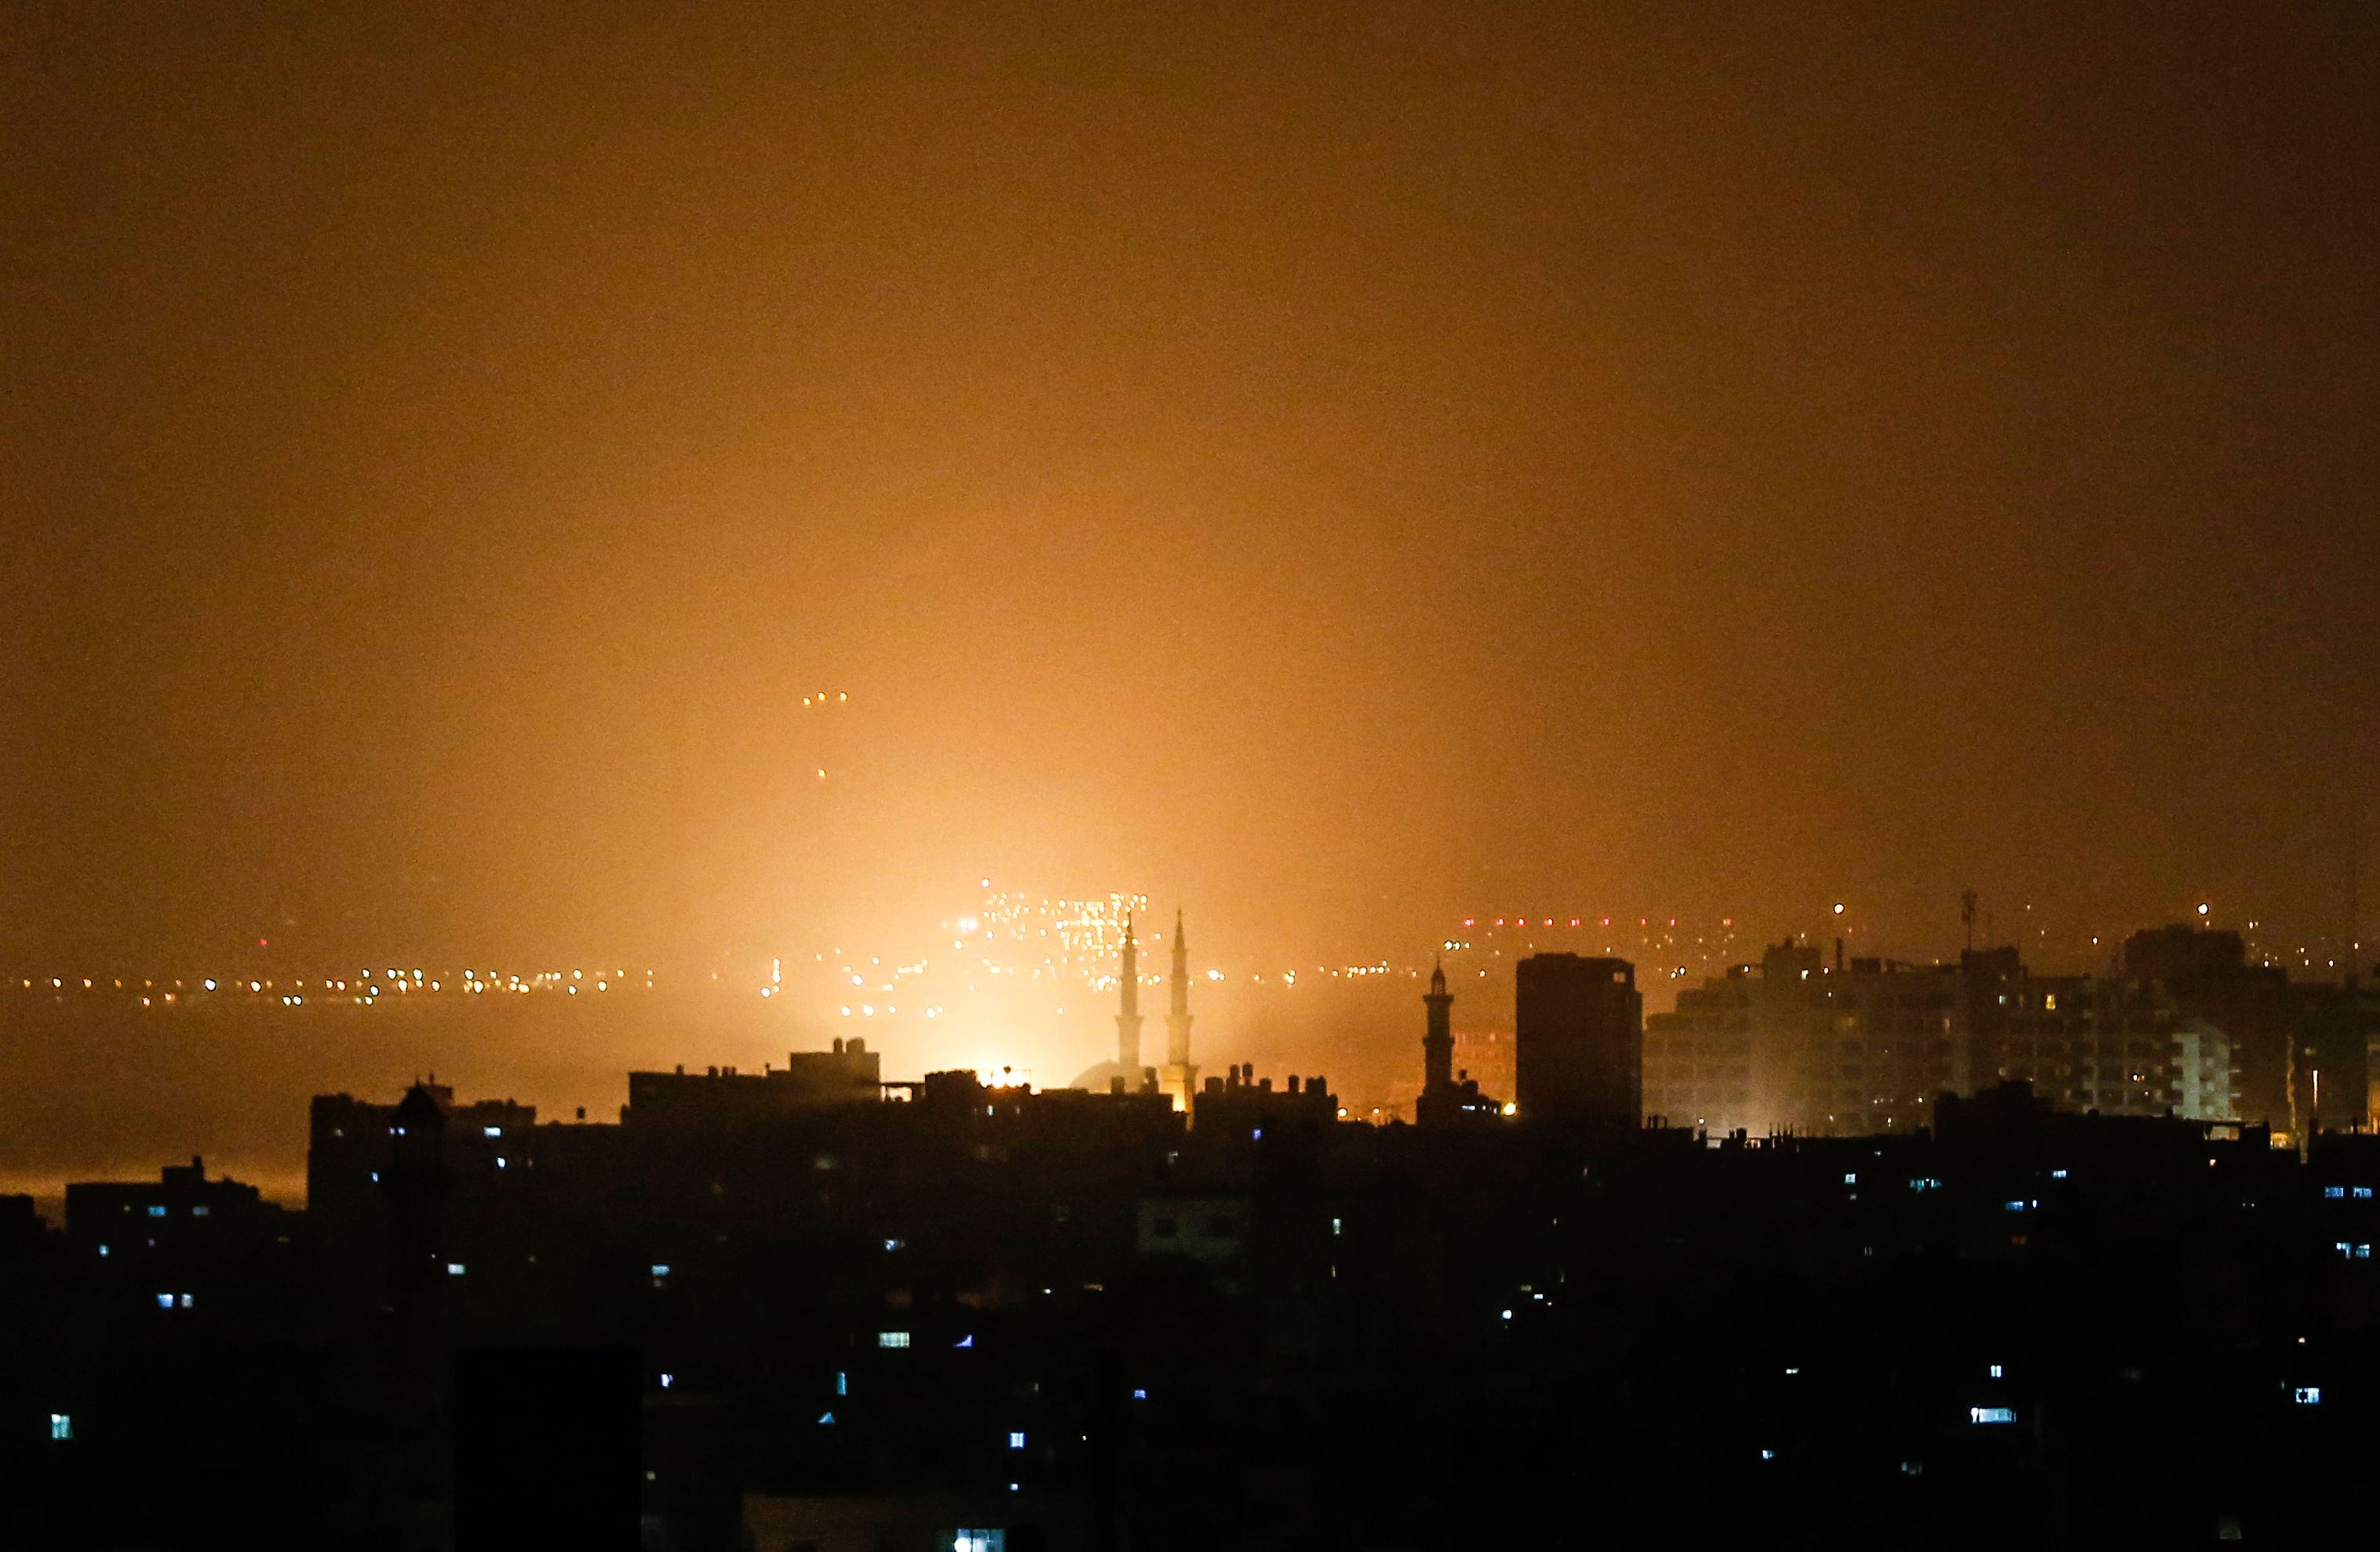 The sky above buildings on the Gaza Strip glows orange during an Israeli air strike in Gaza city late on March 14, 2019.